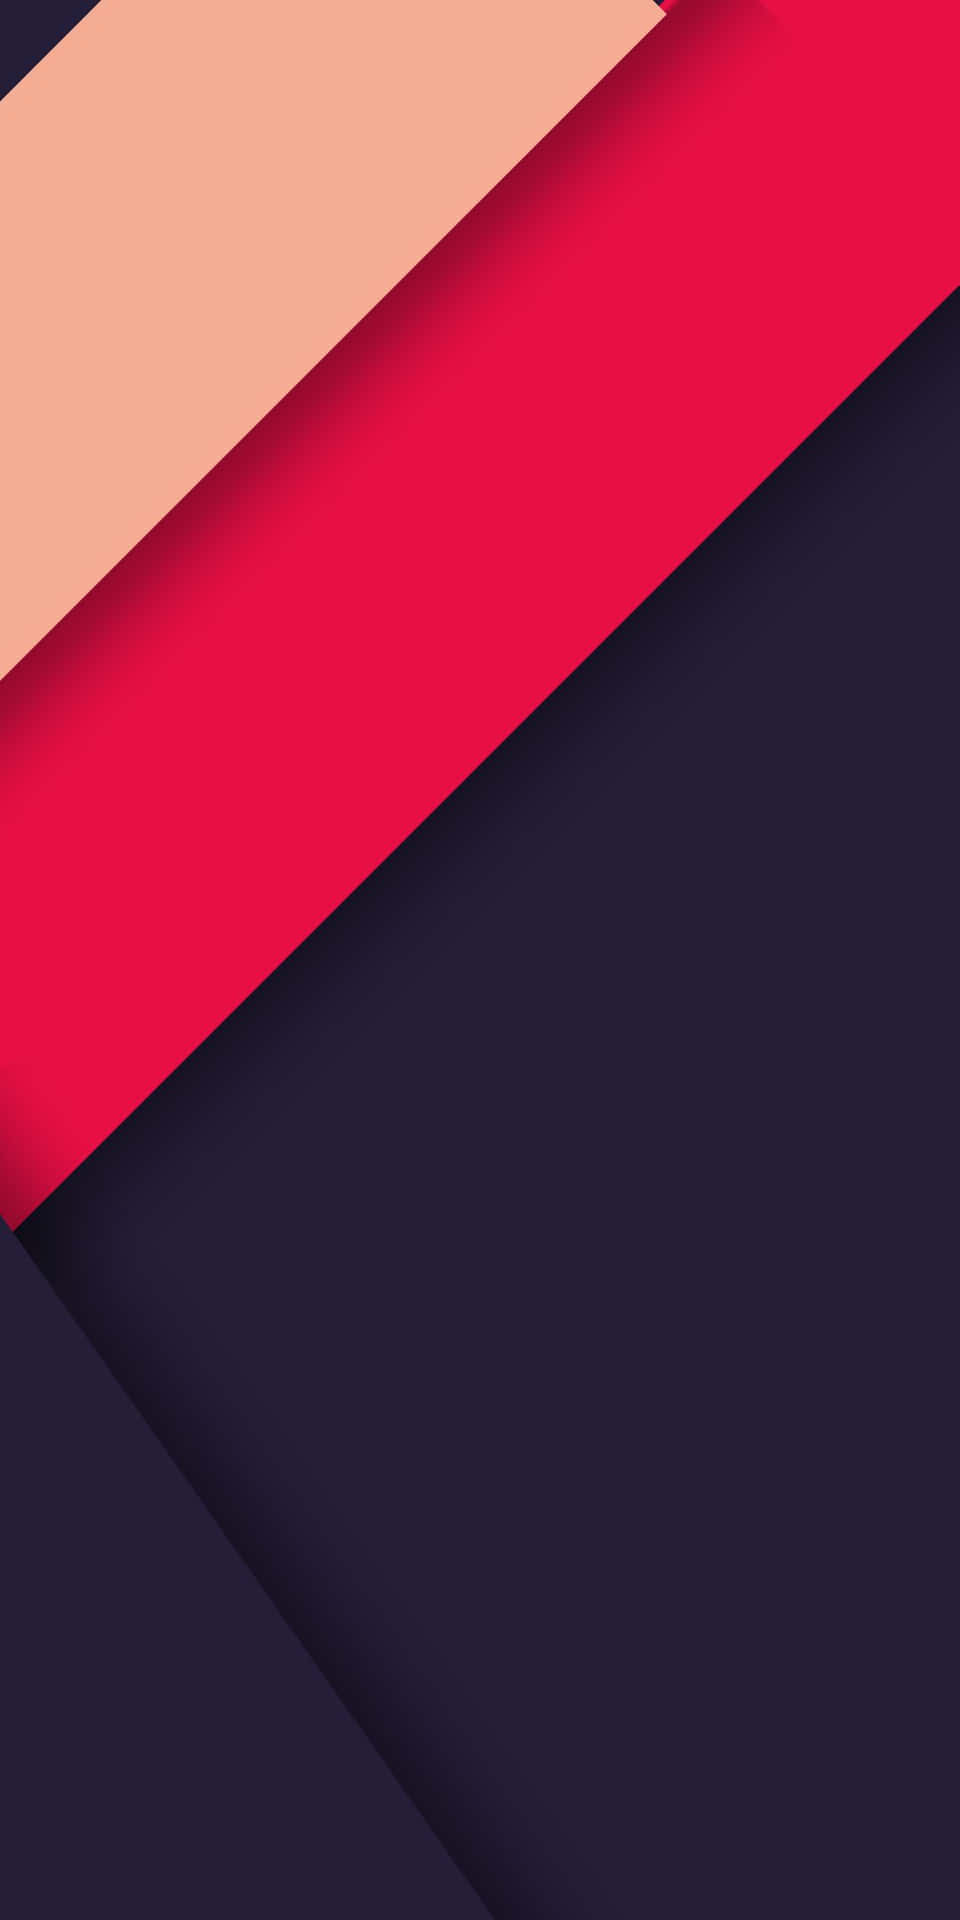 Abstract Android Material Design Background